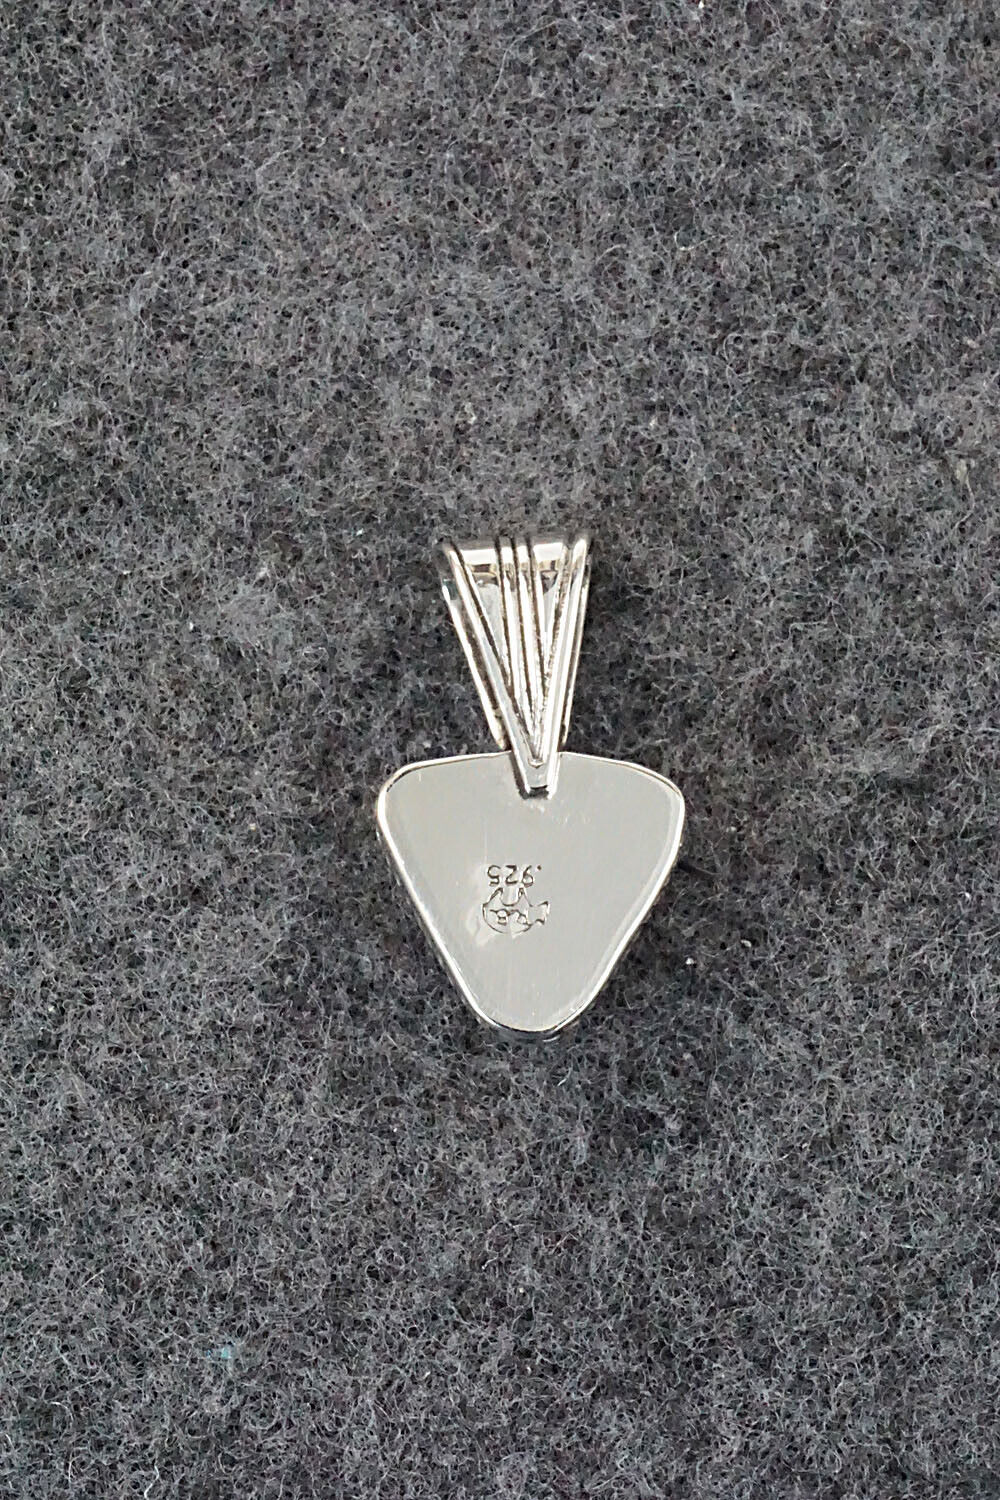 Spiny Oyster and Sterling Silver Pendant - Sadie Jim